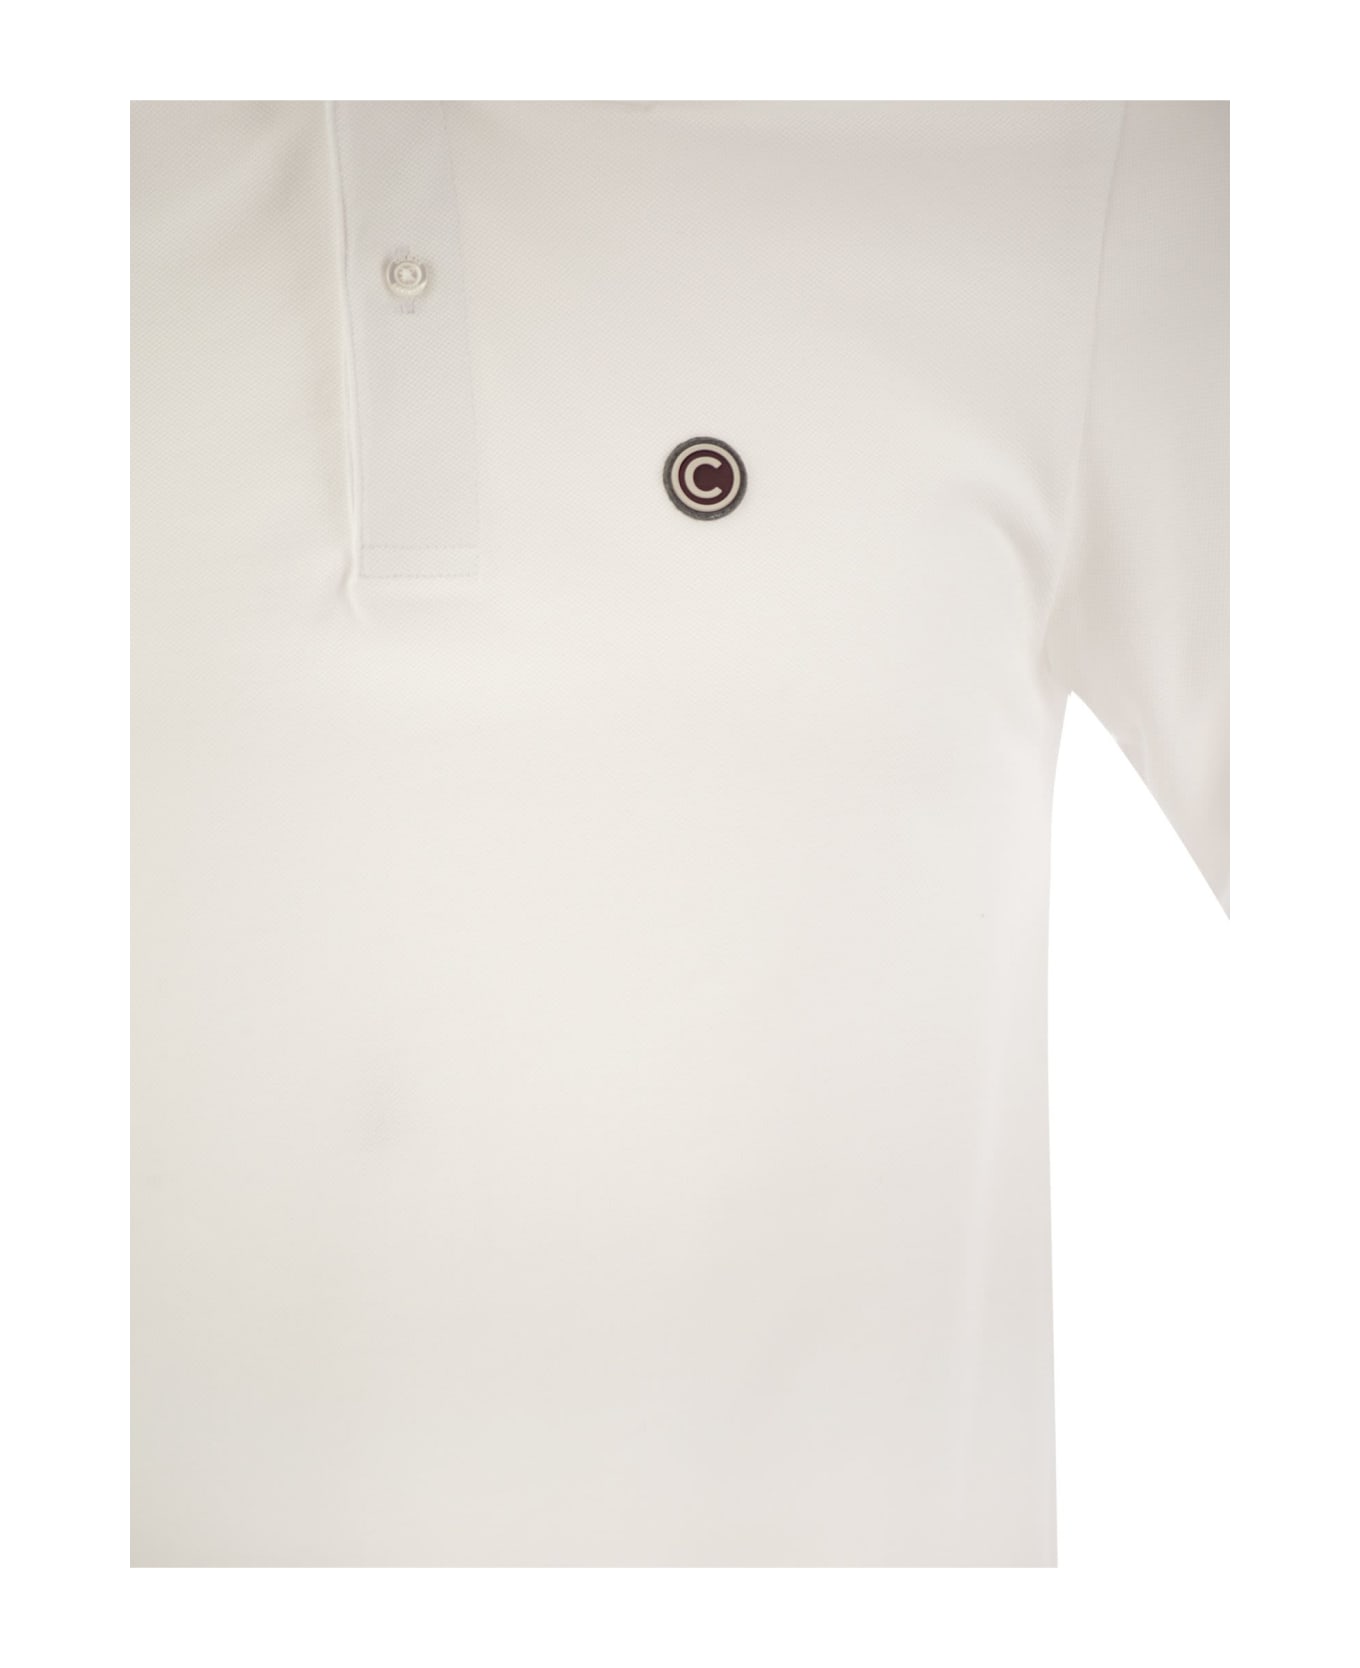 Colmar Pique Polo Shirt With Ribbed Edges - White ポロシャツ